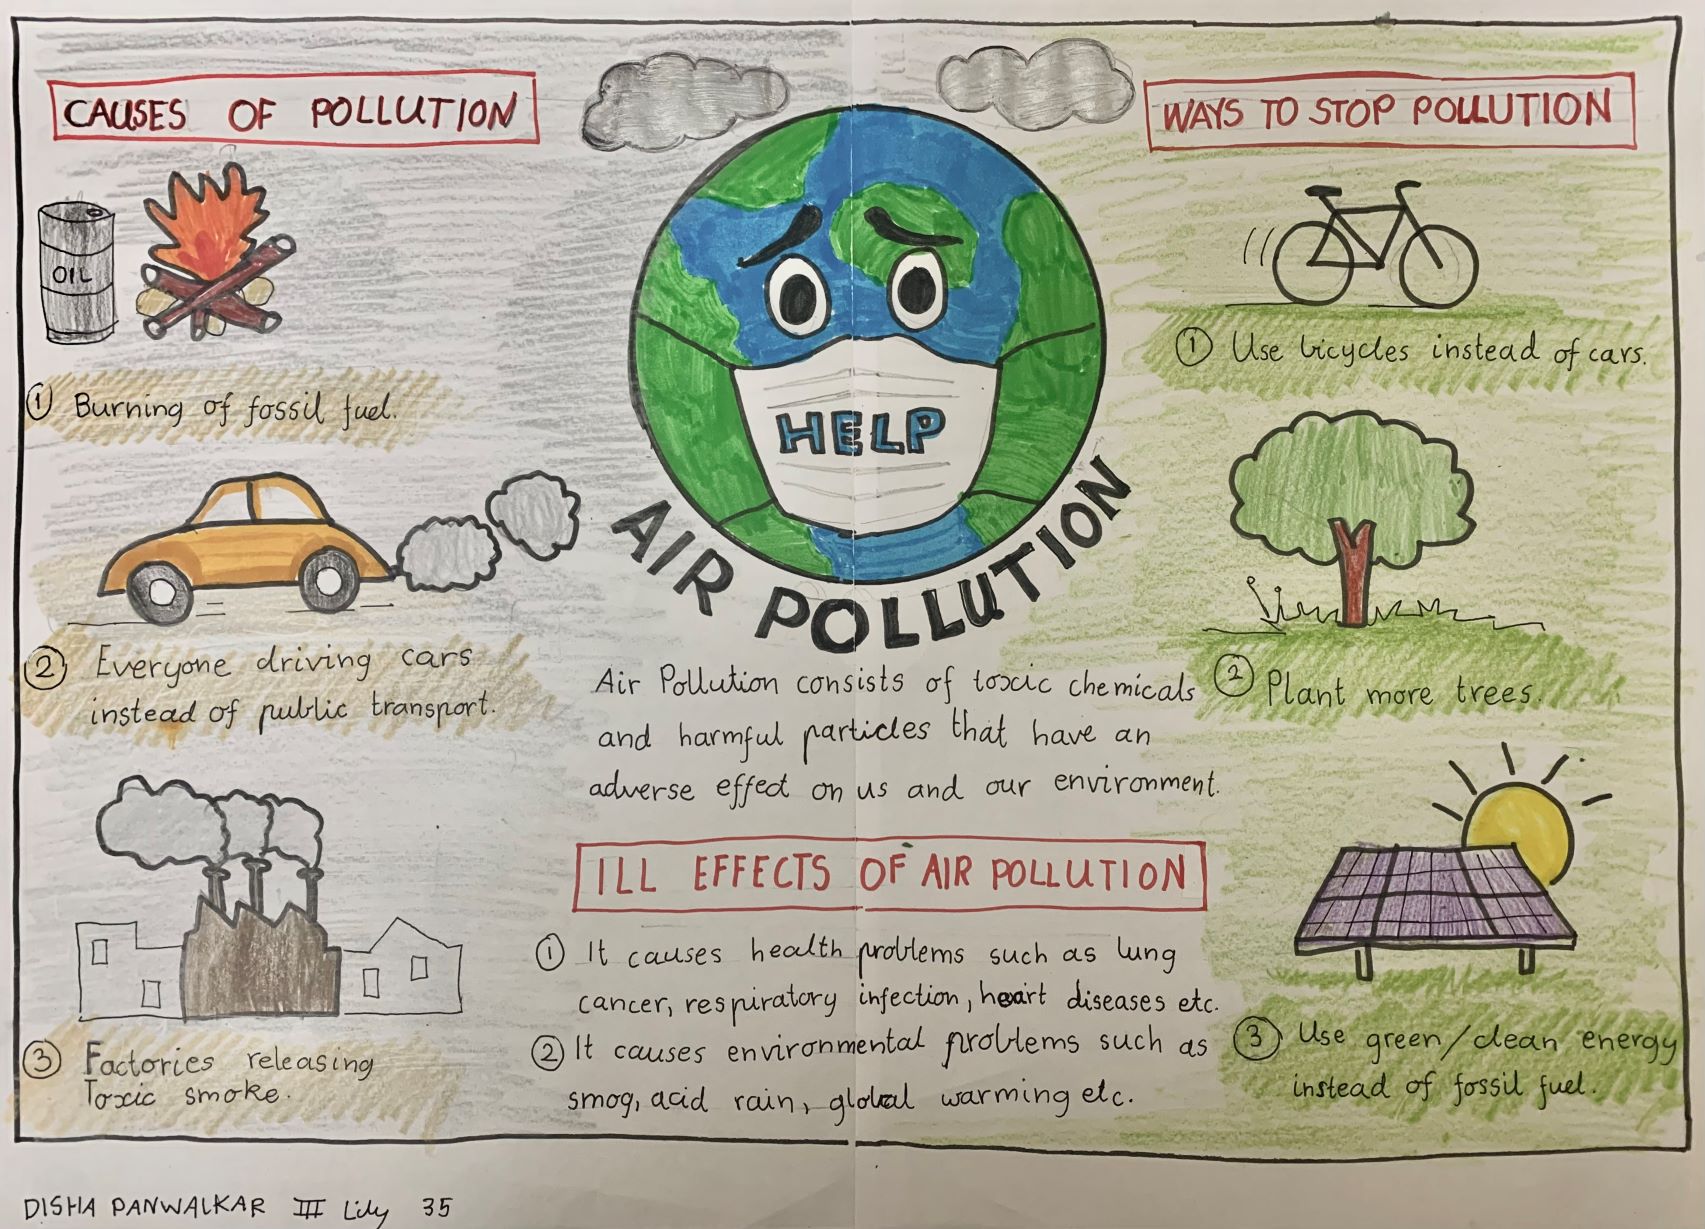 Draw a poster and write a slogan prevention of air pollution - Brainly.in